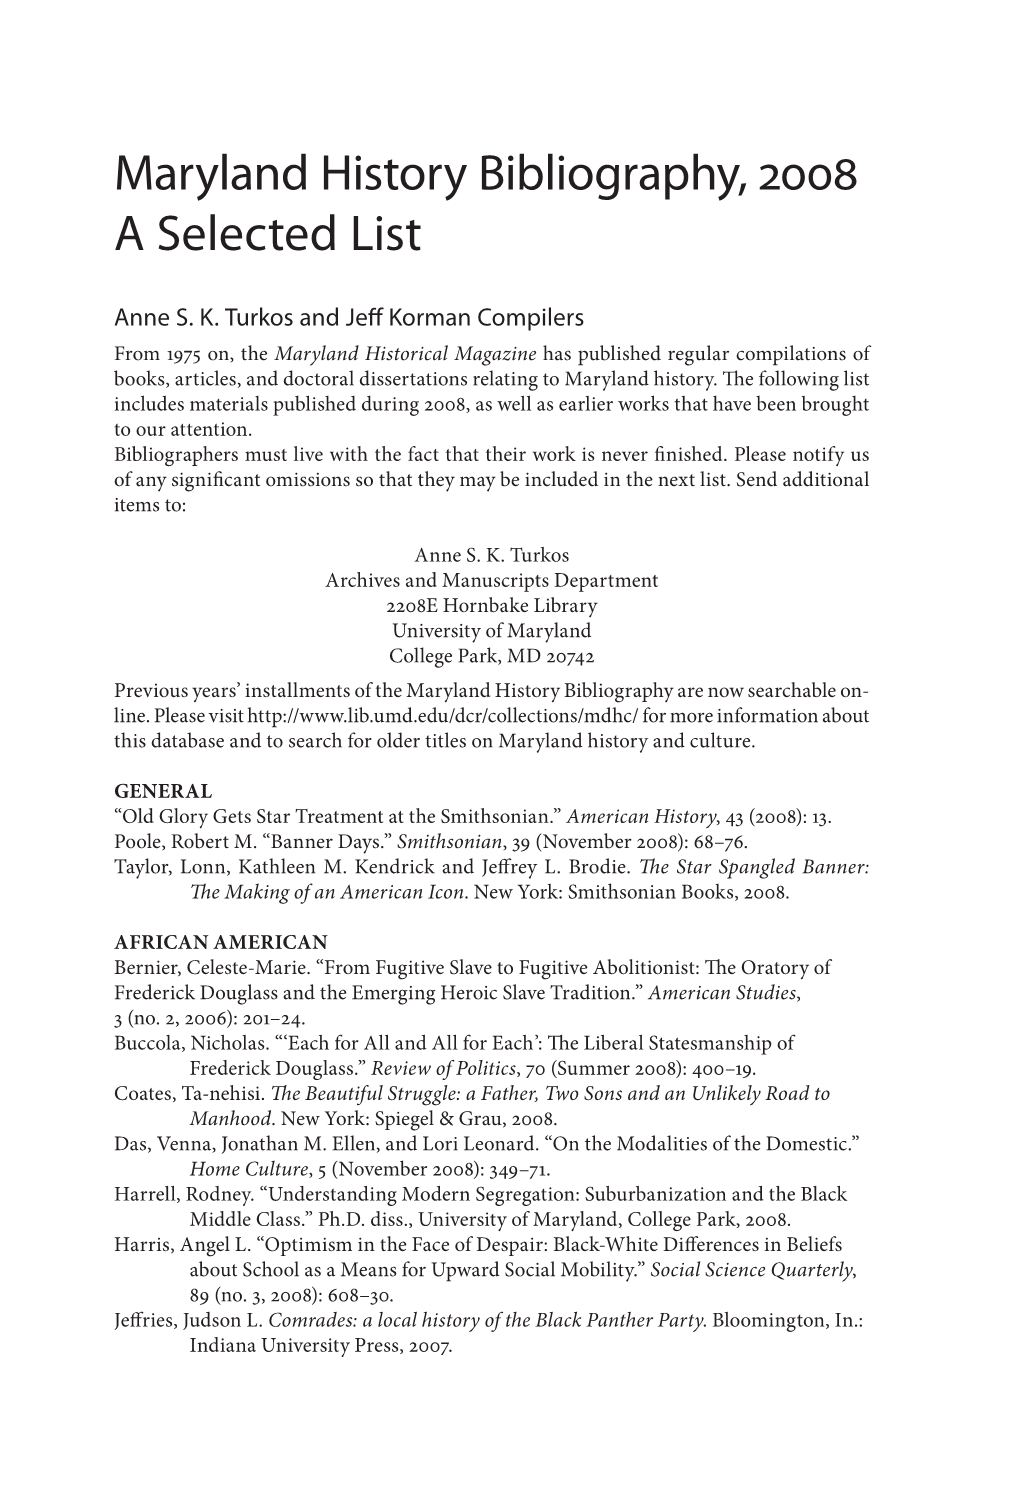 Maryland History Bibliography, 2008 a Selected List